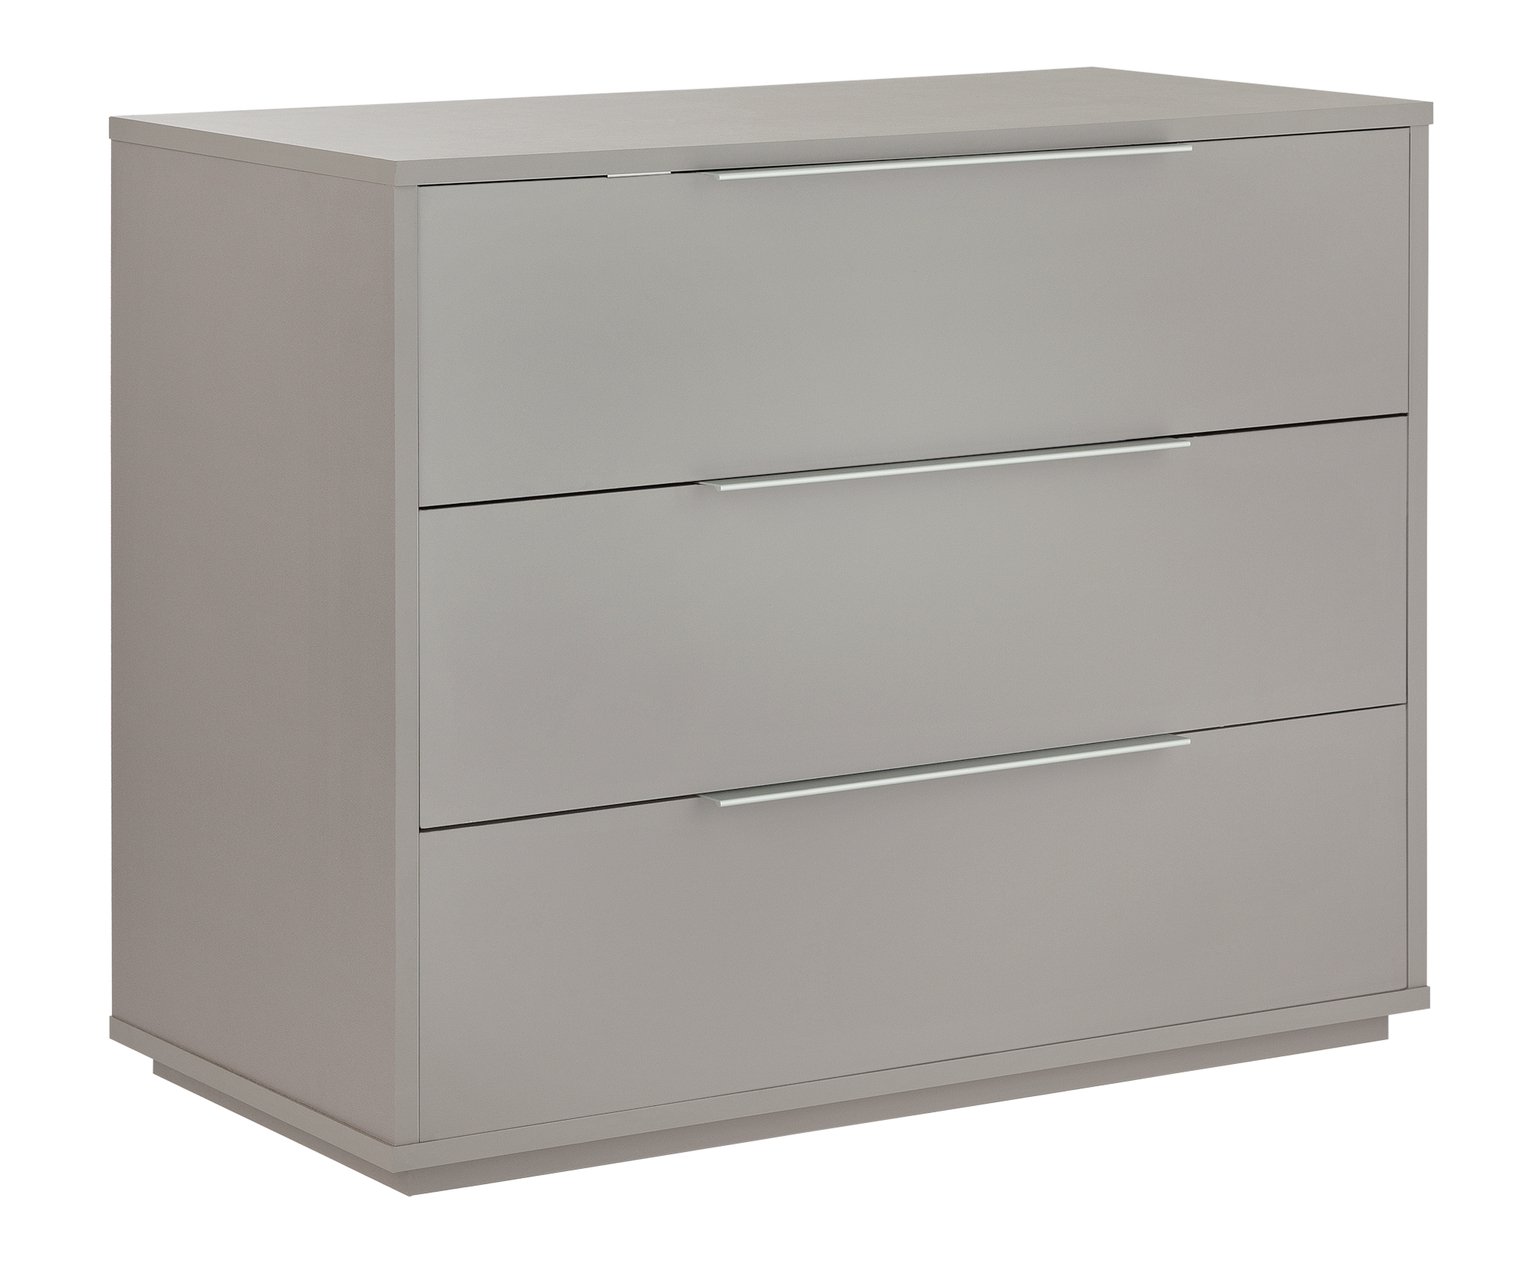 Argos Home Holsted Gloss Bedside & 3 Drawer Chest Set - Grey